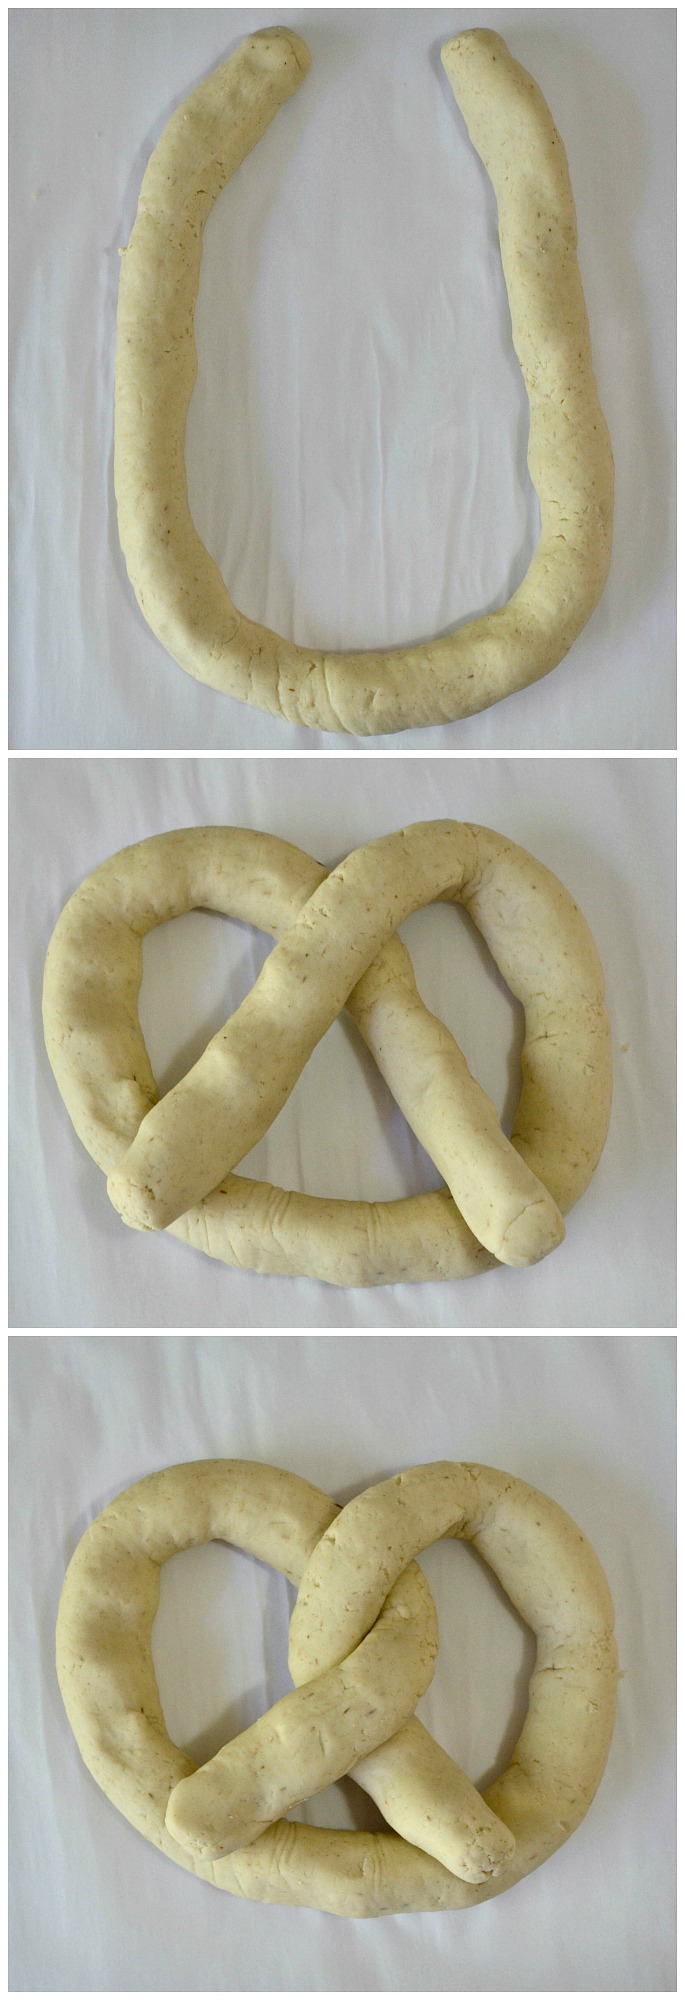 Easy-to-Make gluten free soft pretzels with a tutorial